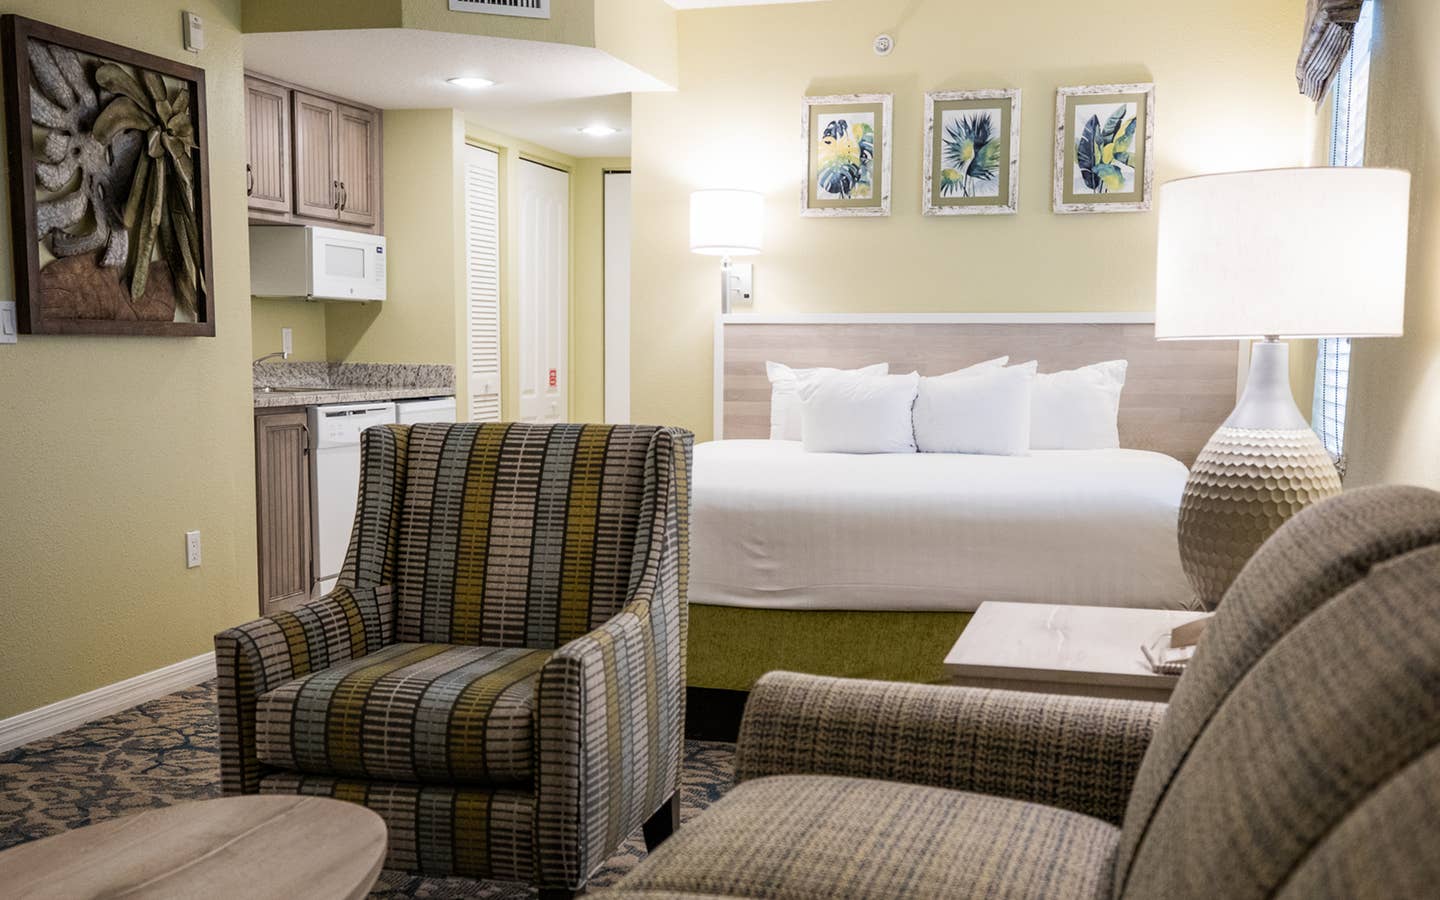 Couch, kitchenette and bed in a villa at Cape Canaveral Resort.